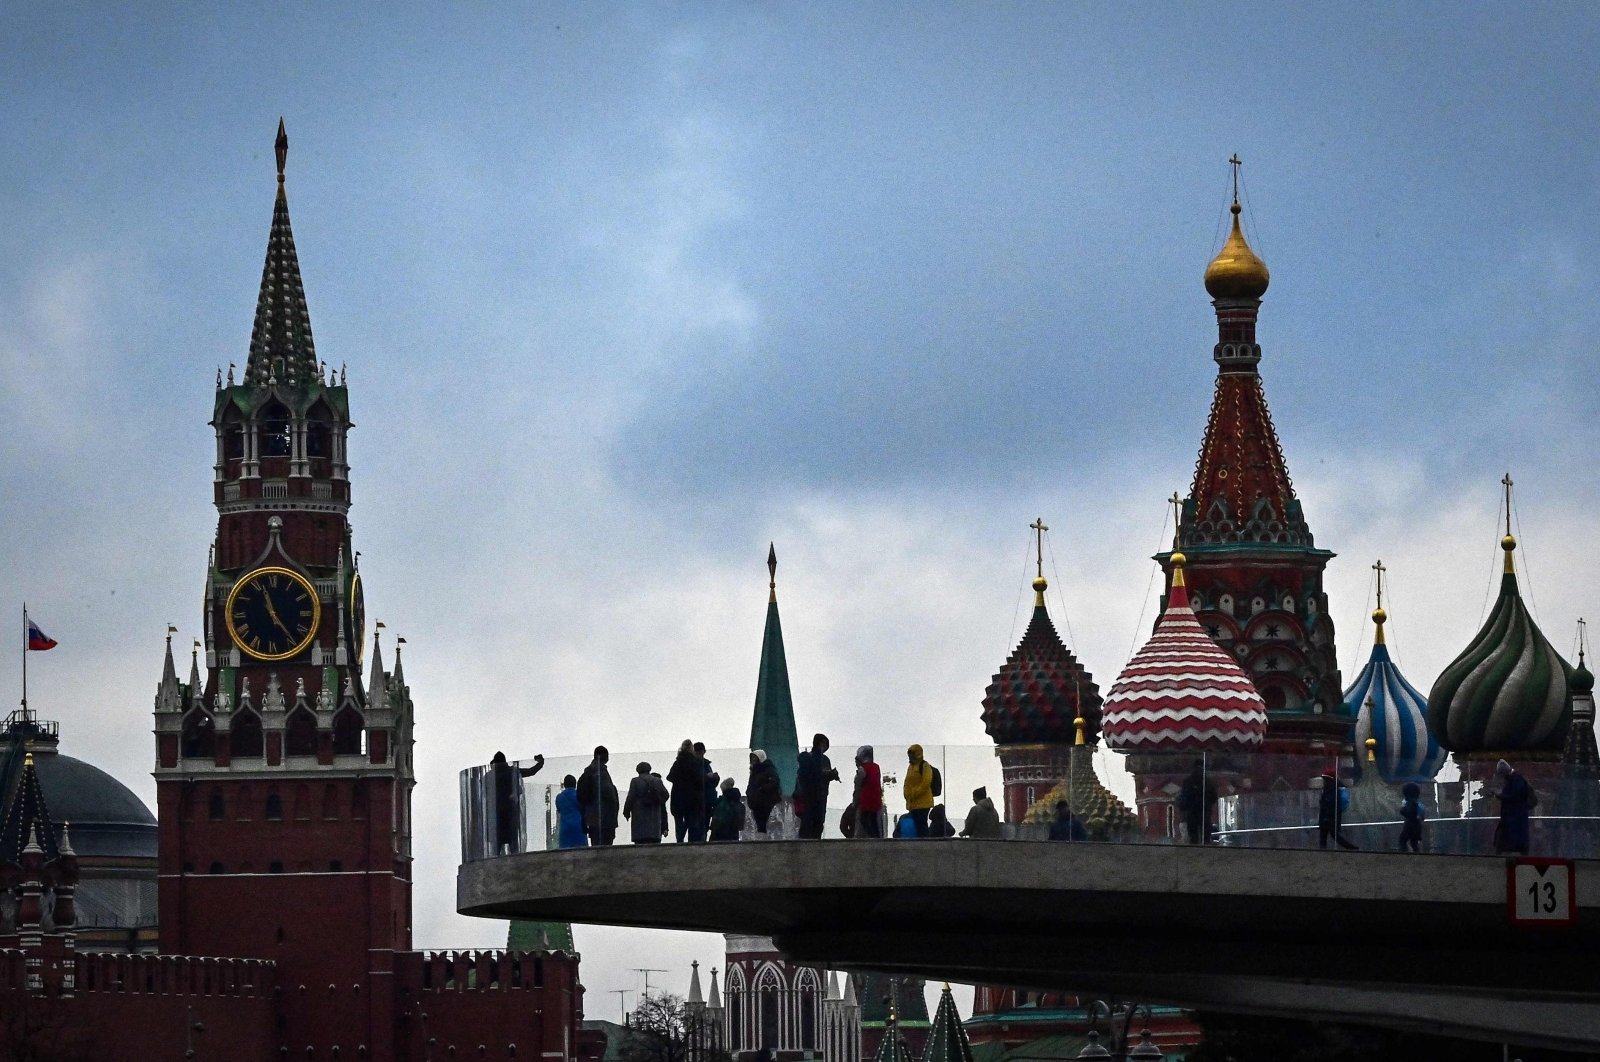 Pedestrians walk on a bridge in the Zaryadye Park, with the Kremlin&#039;s Spasskaya tower and St. Basil Cathedral in the background, Moscow, Russia, Nov. 4, 2021. (AFP Photo)